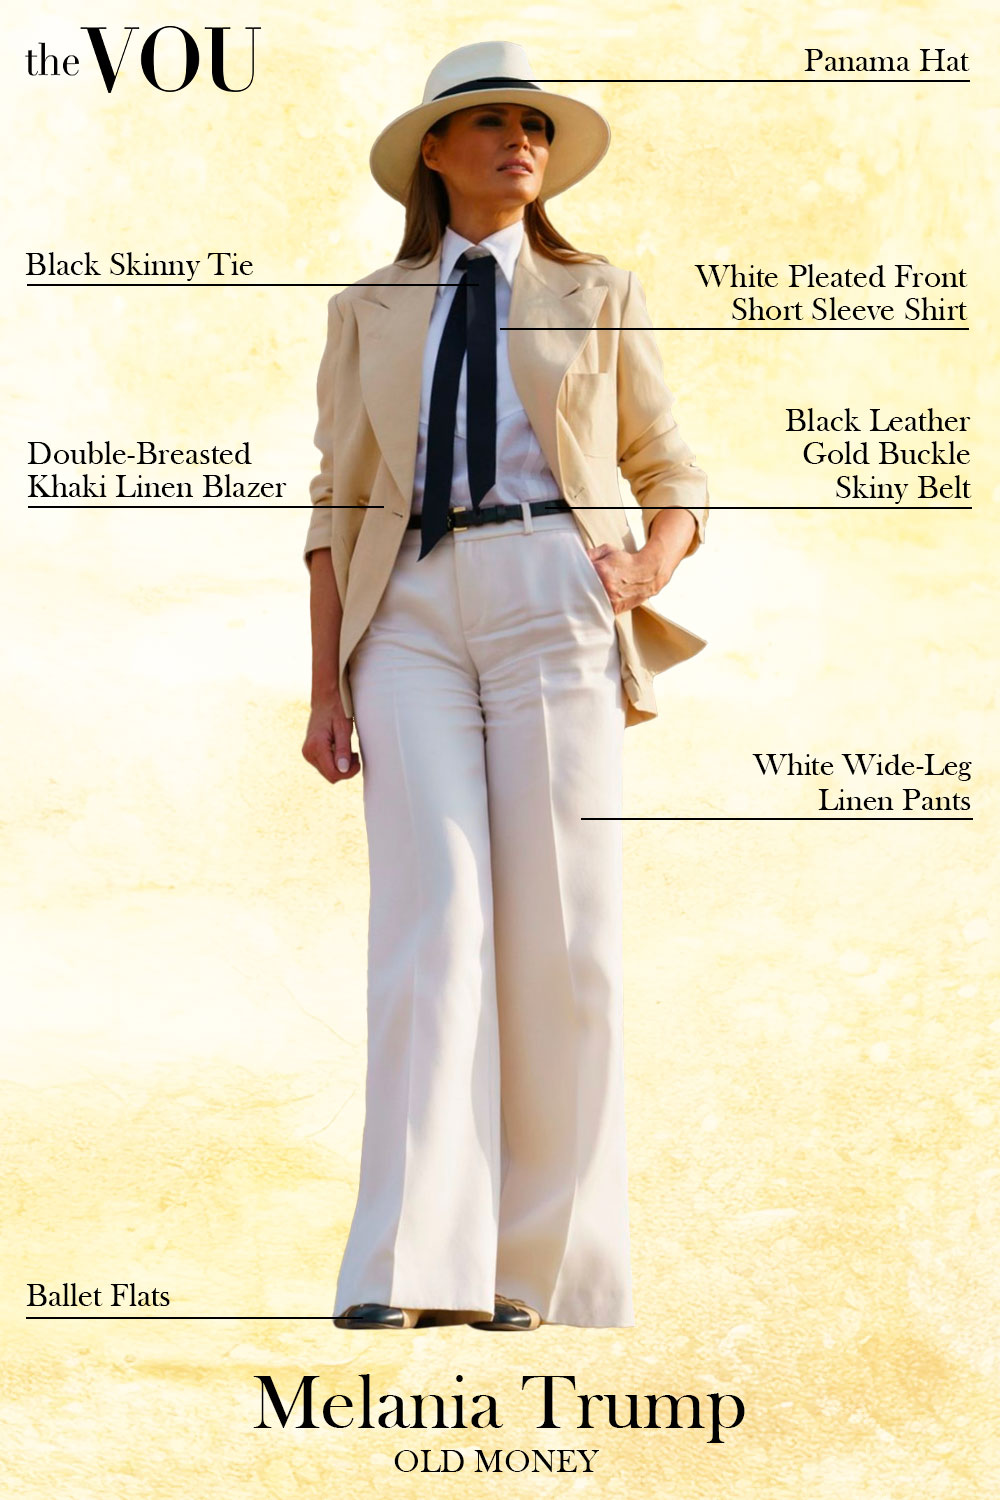 10 Old Money Style Outfits Ideas for a Super Wealthy Look